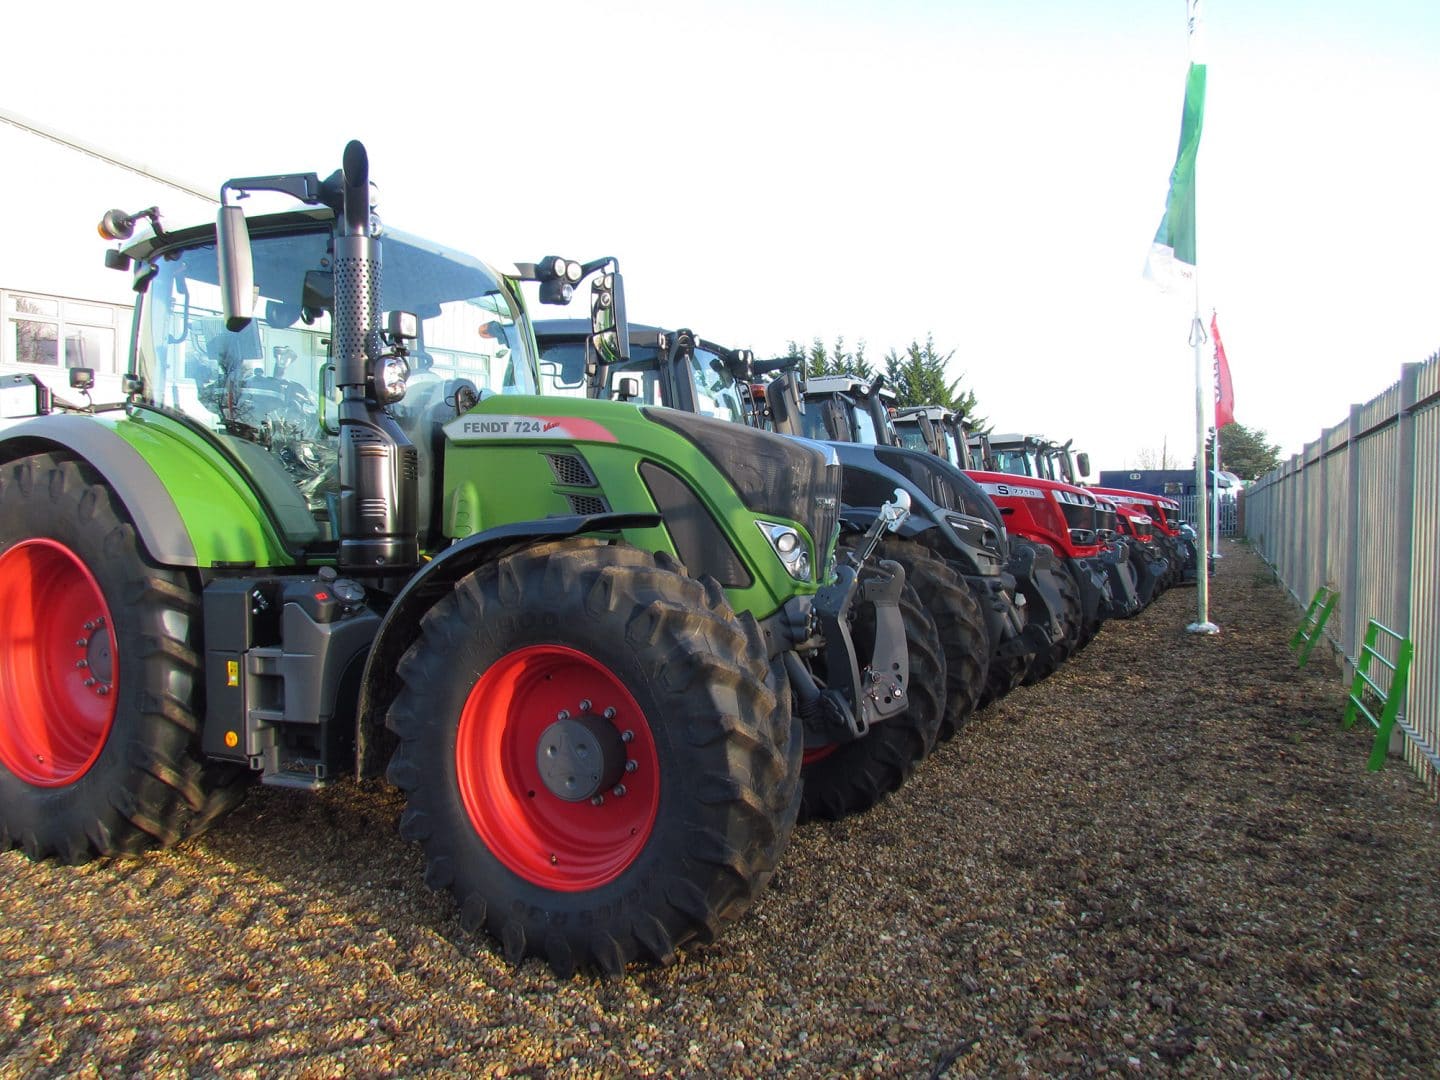 Used tractors for sale in East Anglia